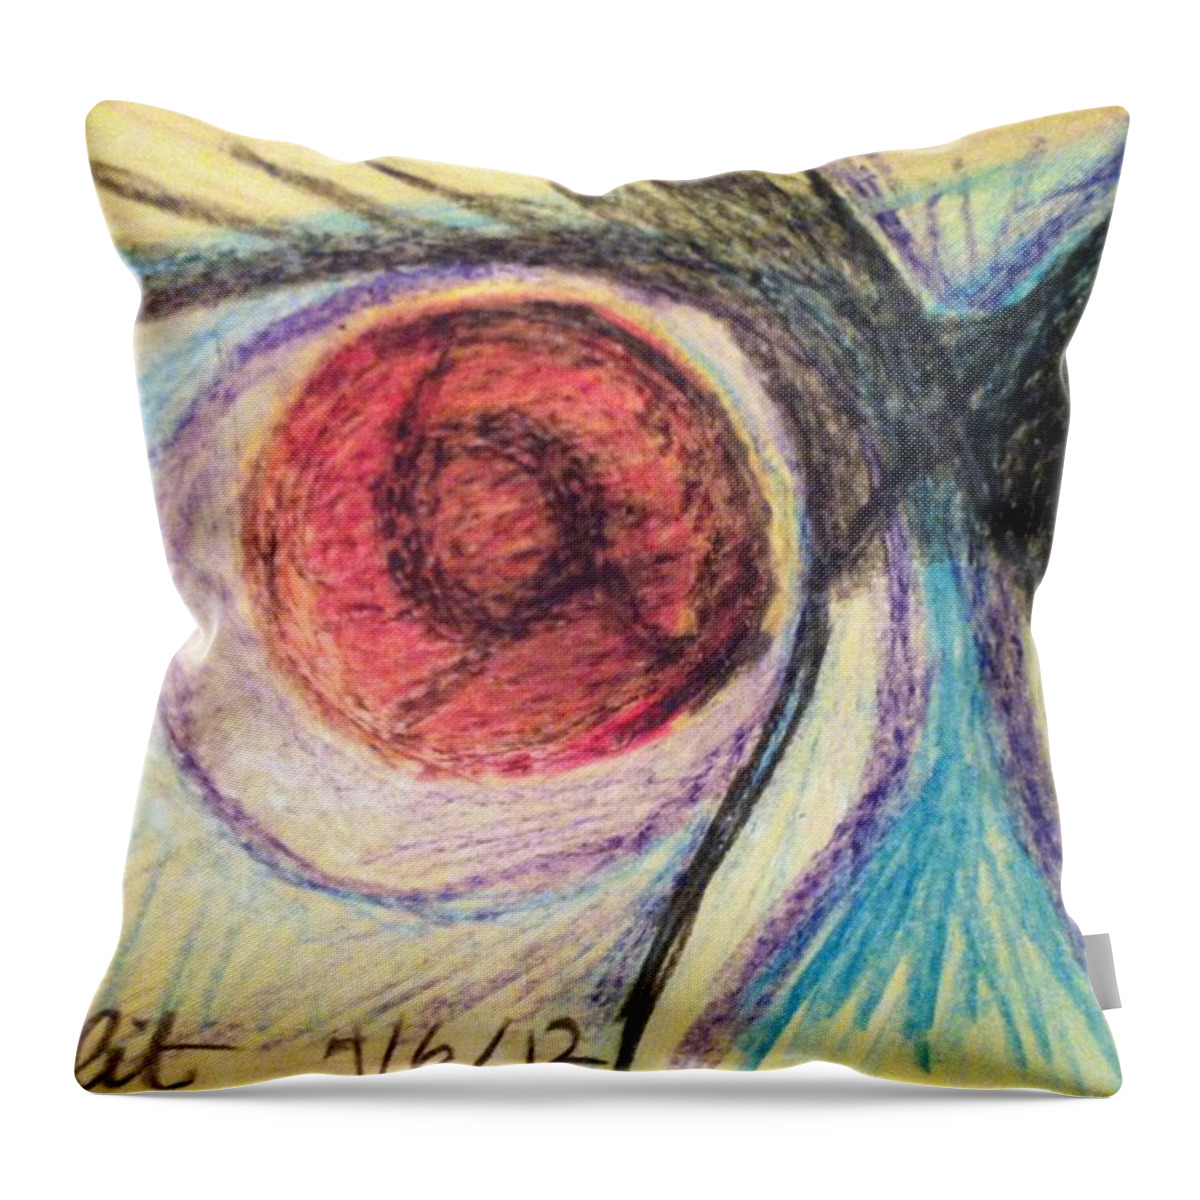 Eye Of The Beholder Throw Pillow featuring the drawing Eye of the Beholder by Andrew Blitman